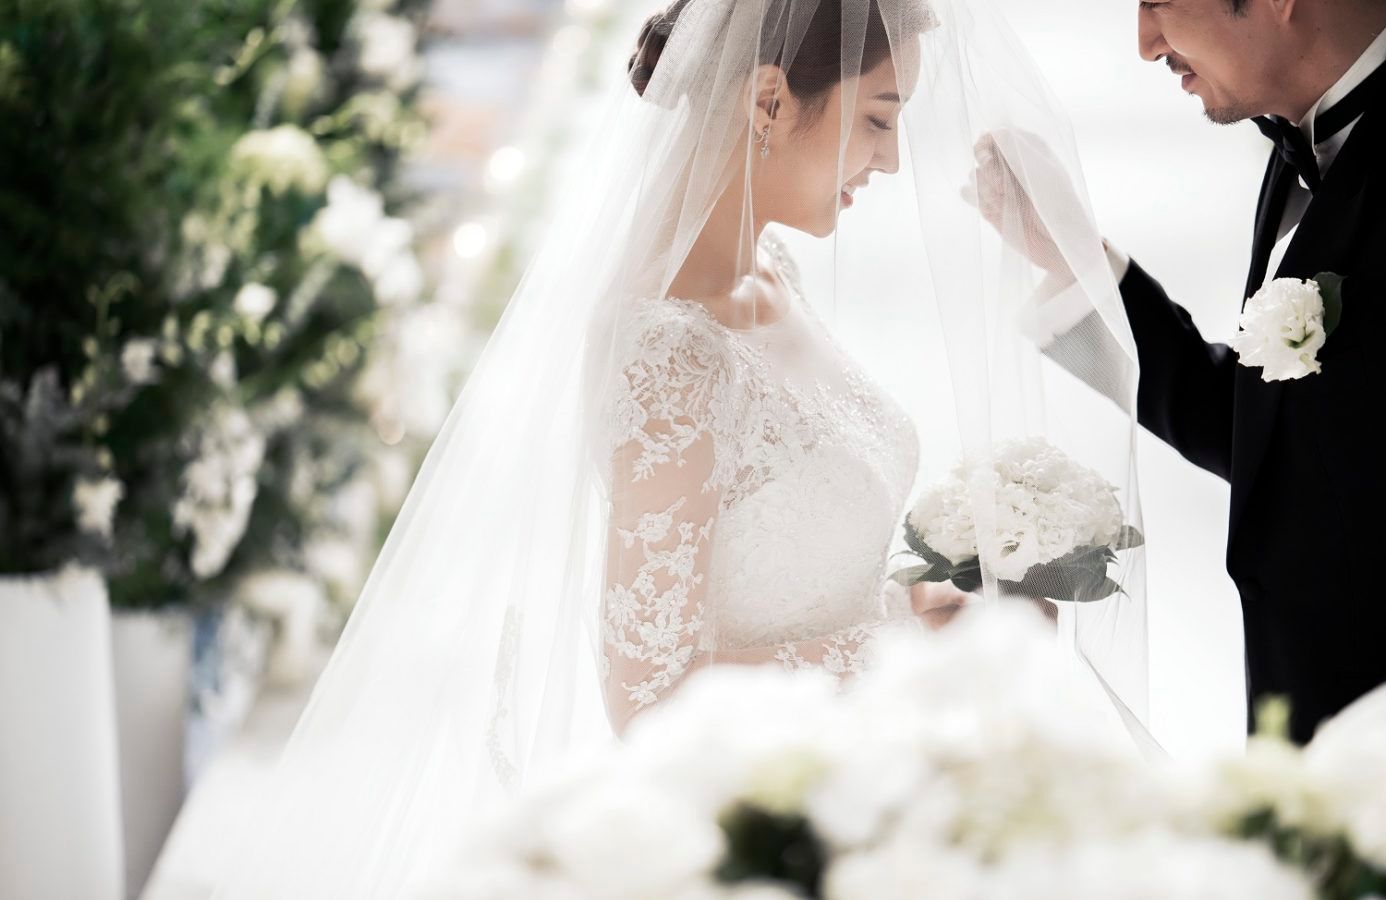 A Dream Wedding for the Nation’s Healthcare Heroes